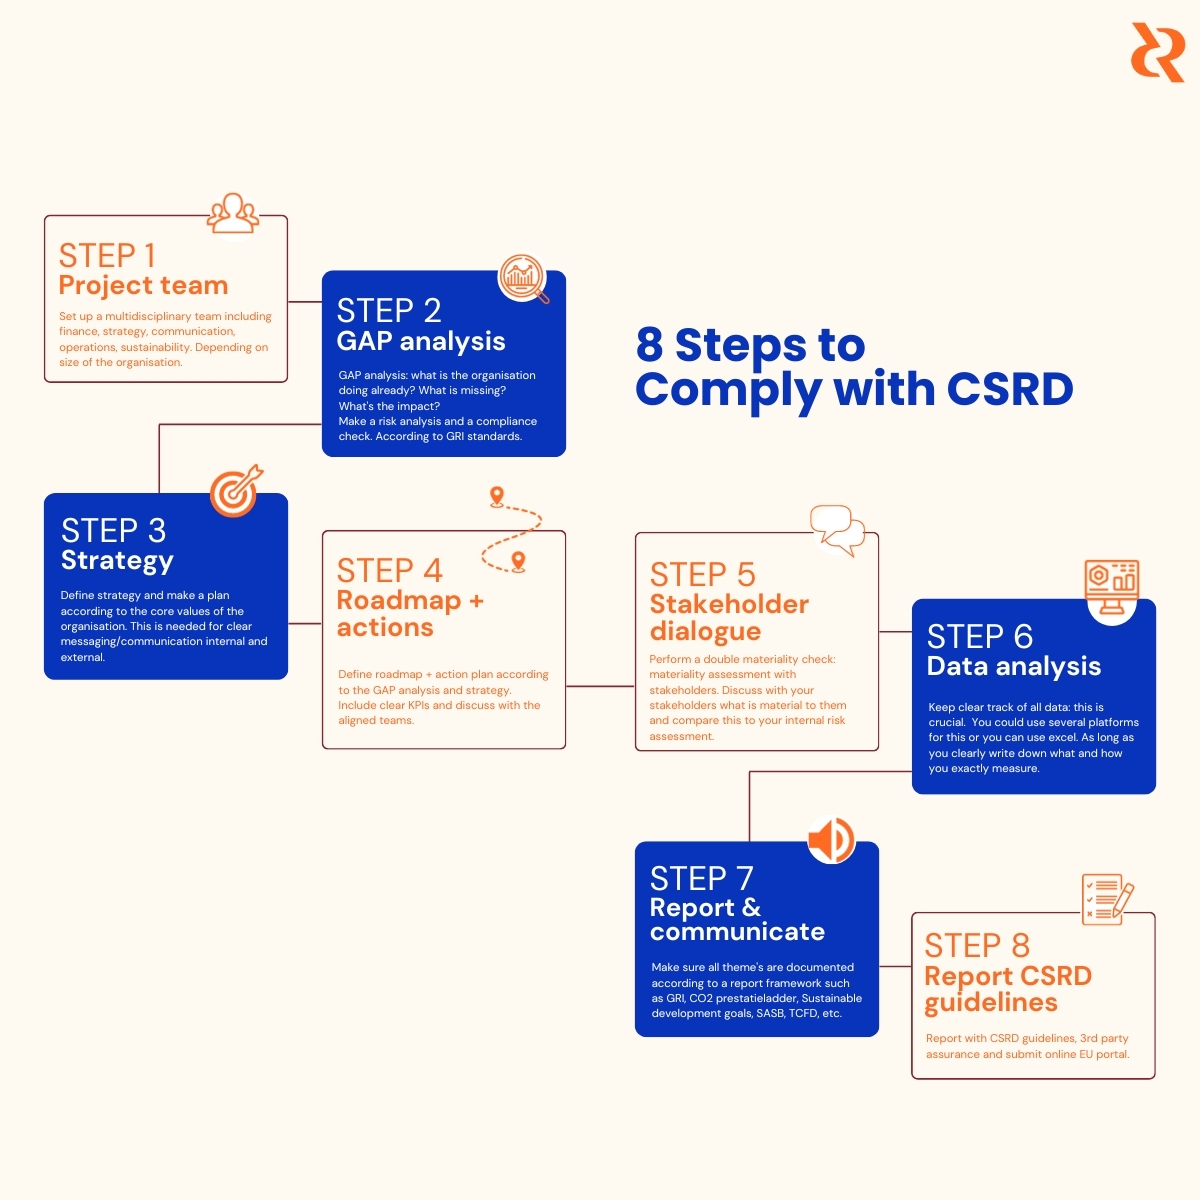 Steps to comply with CSRD